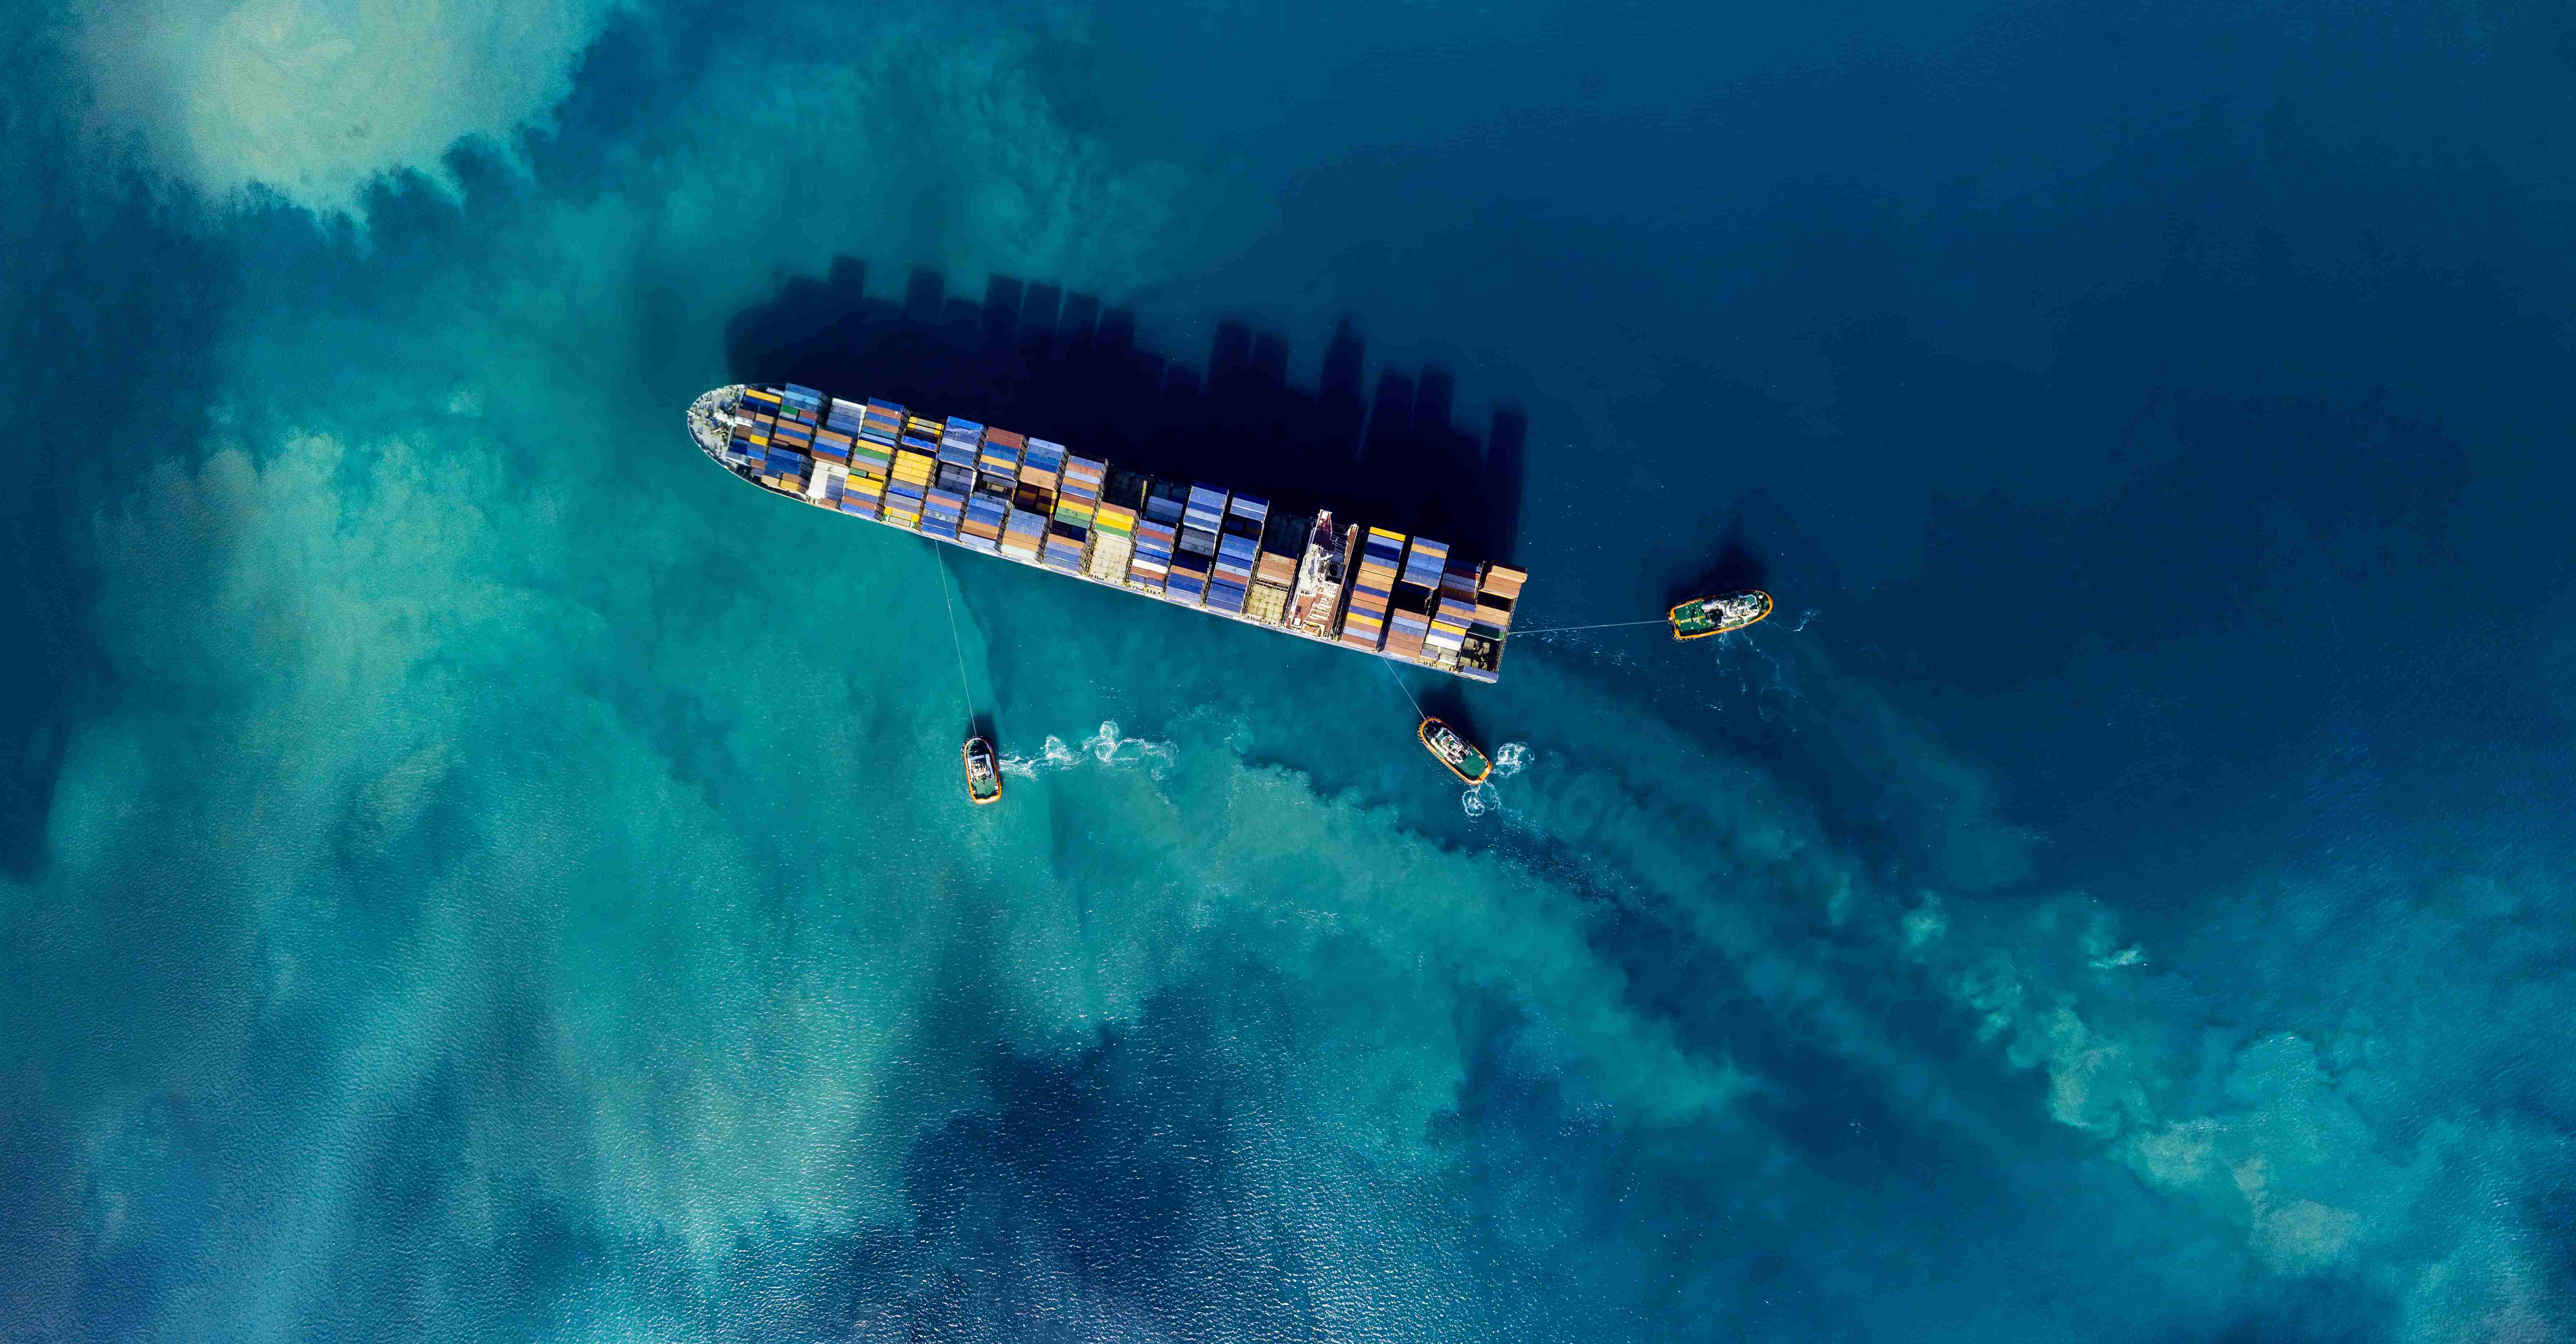 Image of a cargo ship in the water from above